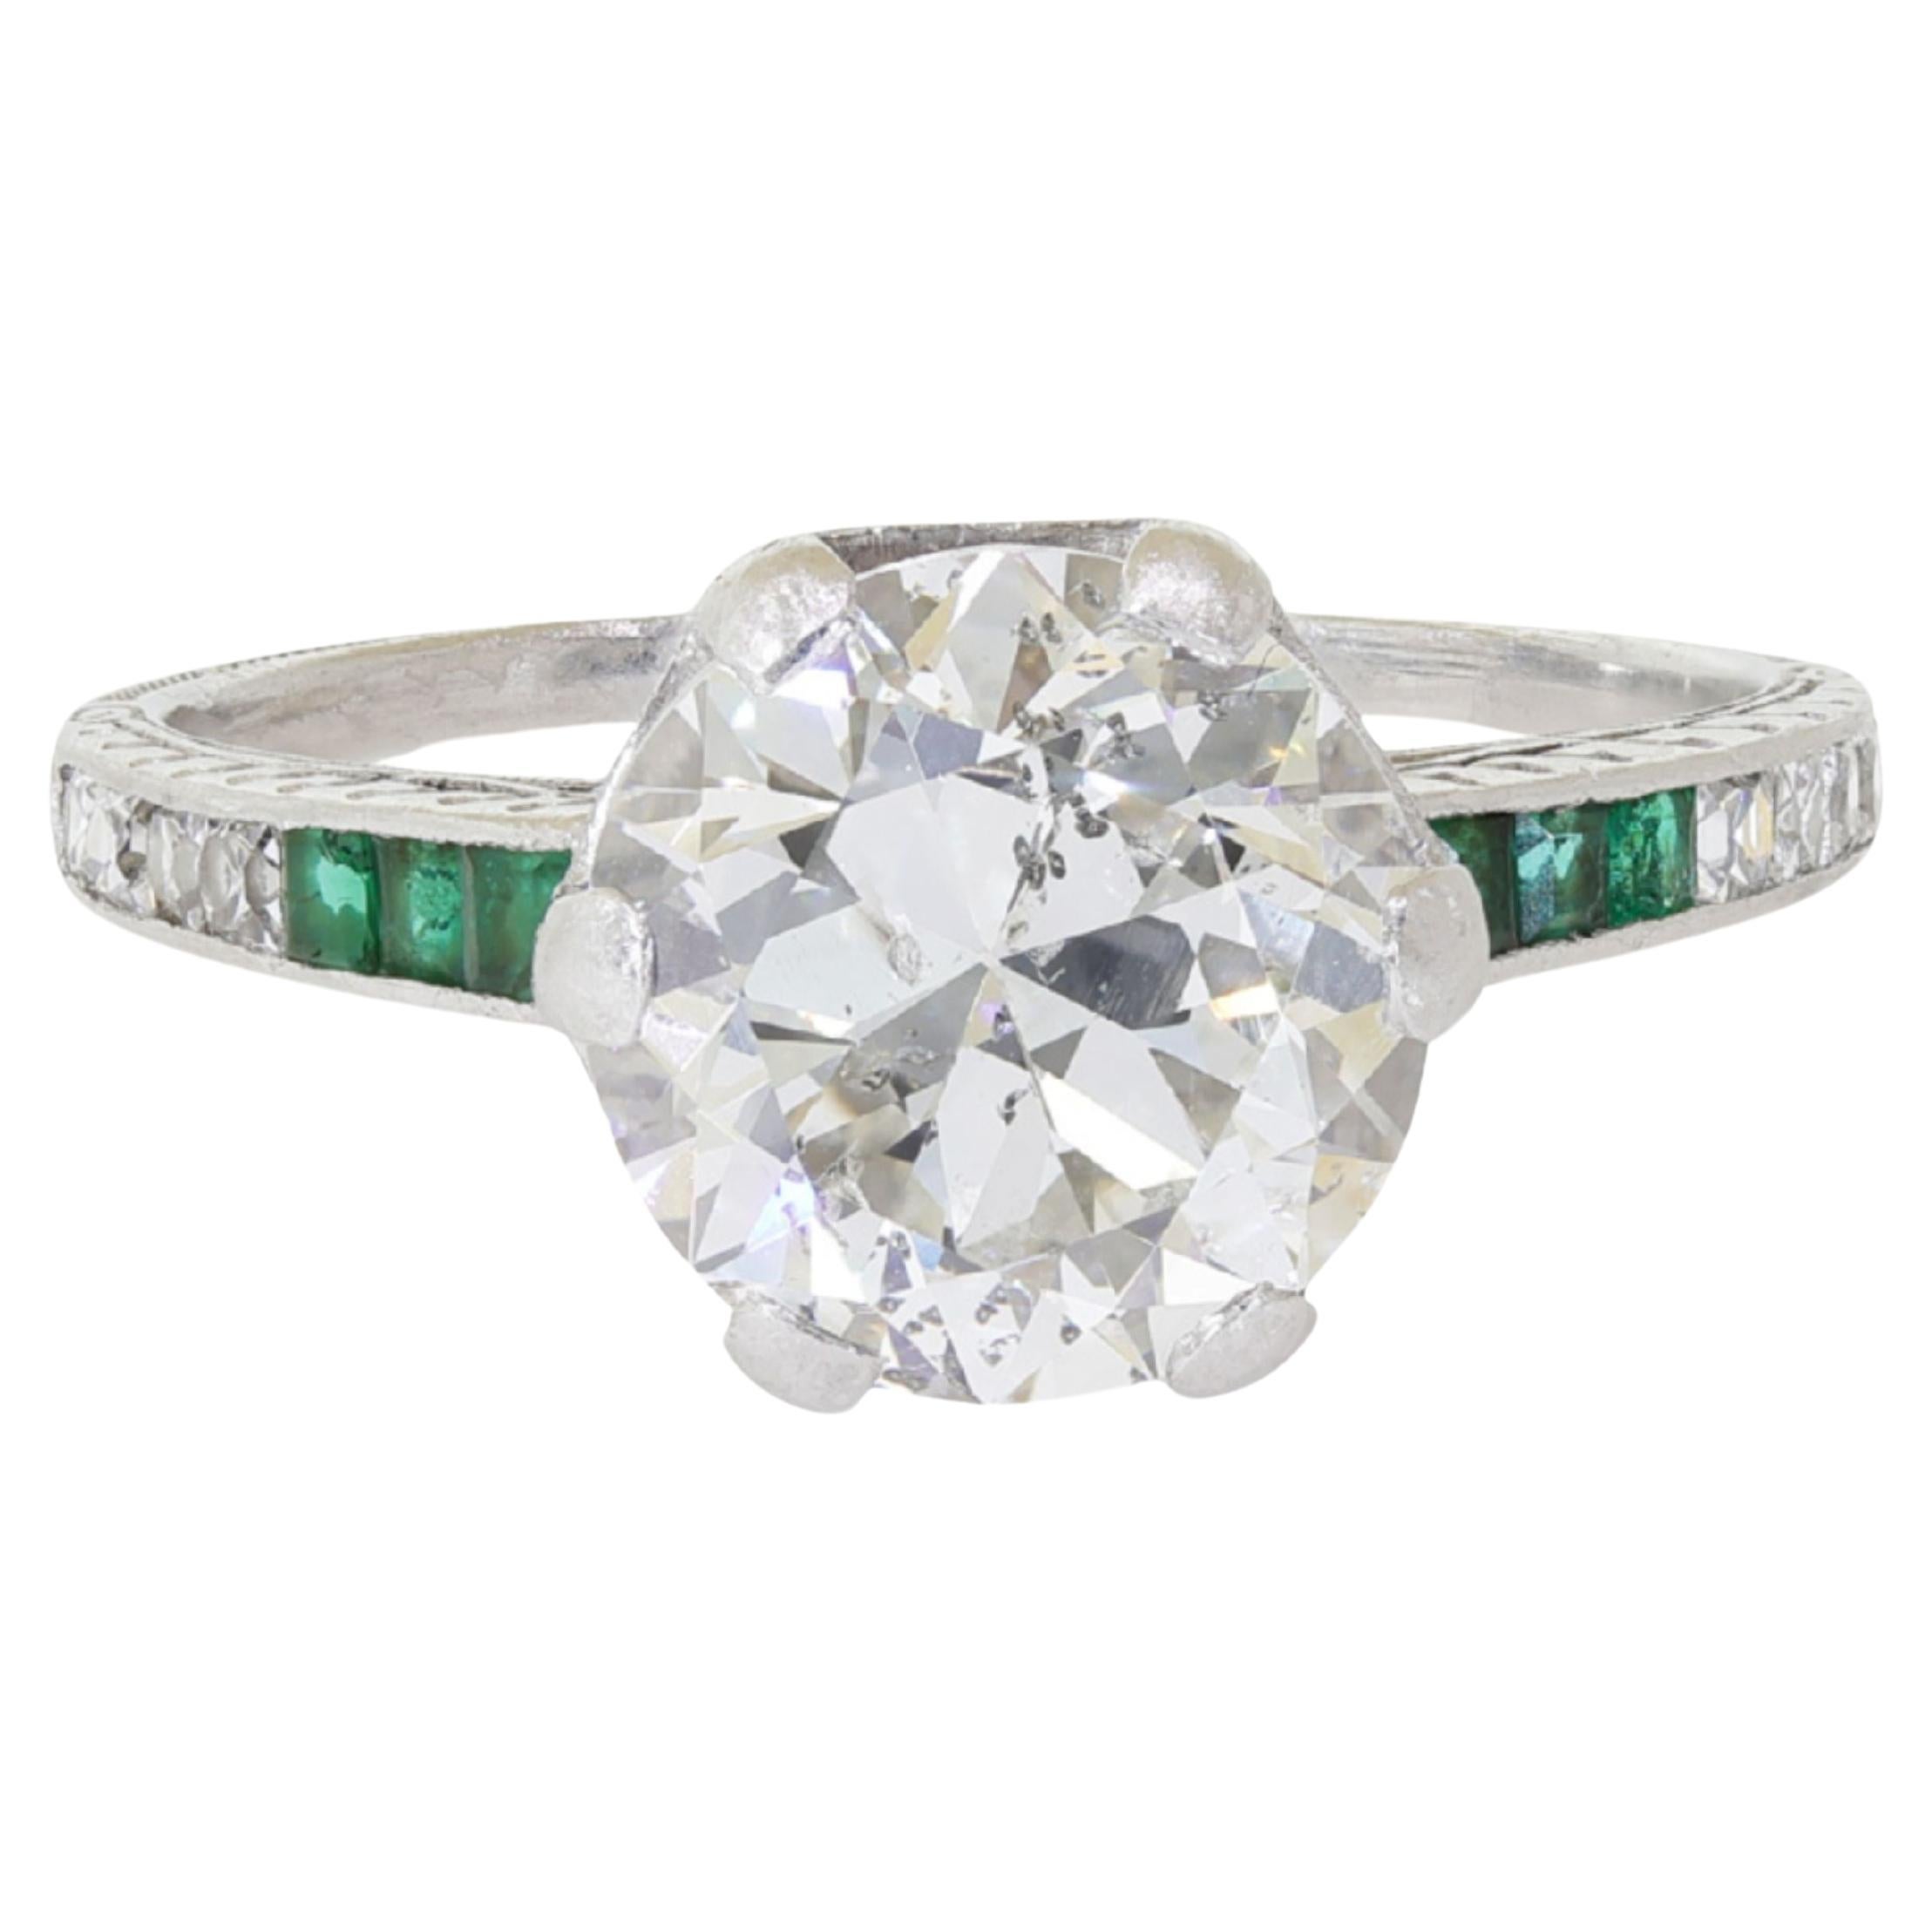 Vintage Art Deco Carved Filigree Platinum Diamond and Emerald Engagement Ring. Featuring a 2.50 carat Old European cut natural diamond center stone. Set in a platinum 6-prong setting that bears a mystical filigree carving that captivates the eye.